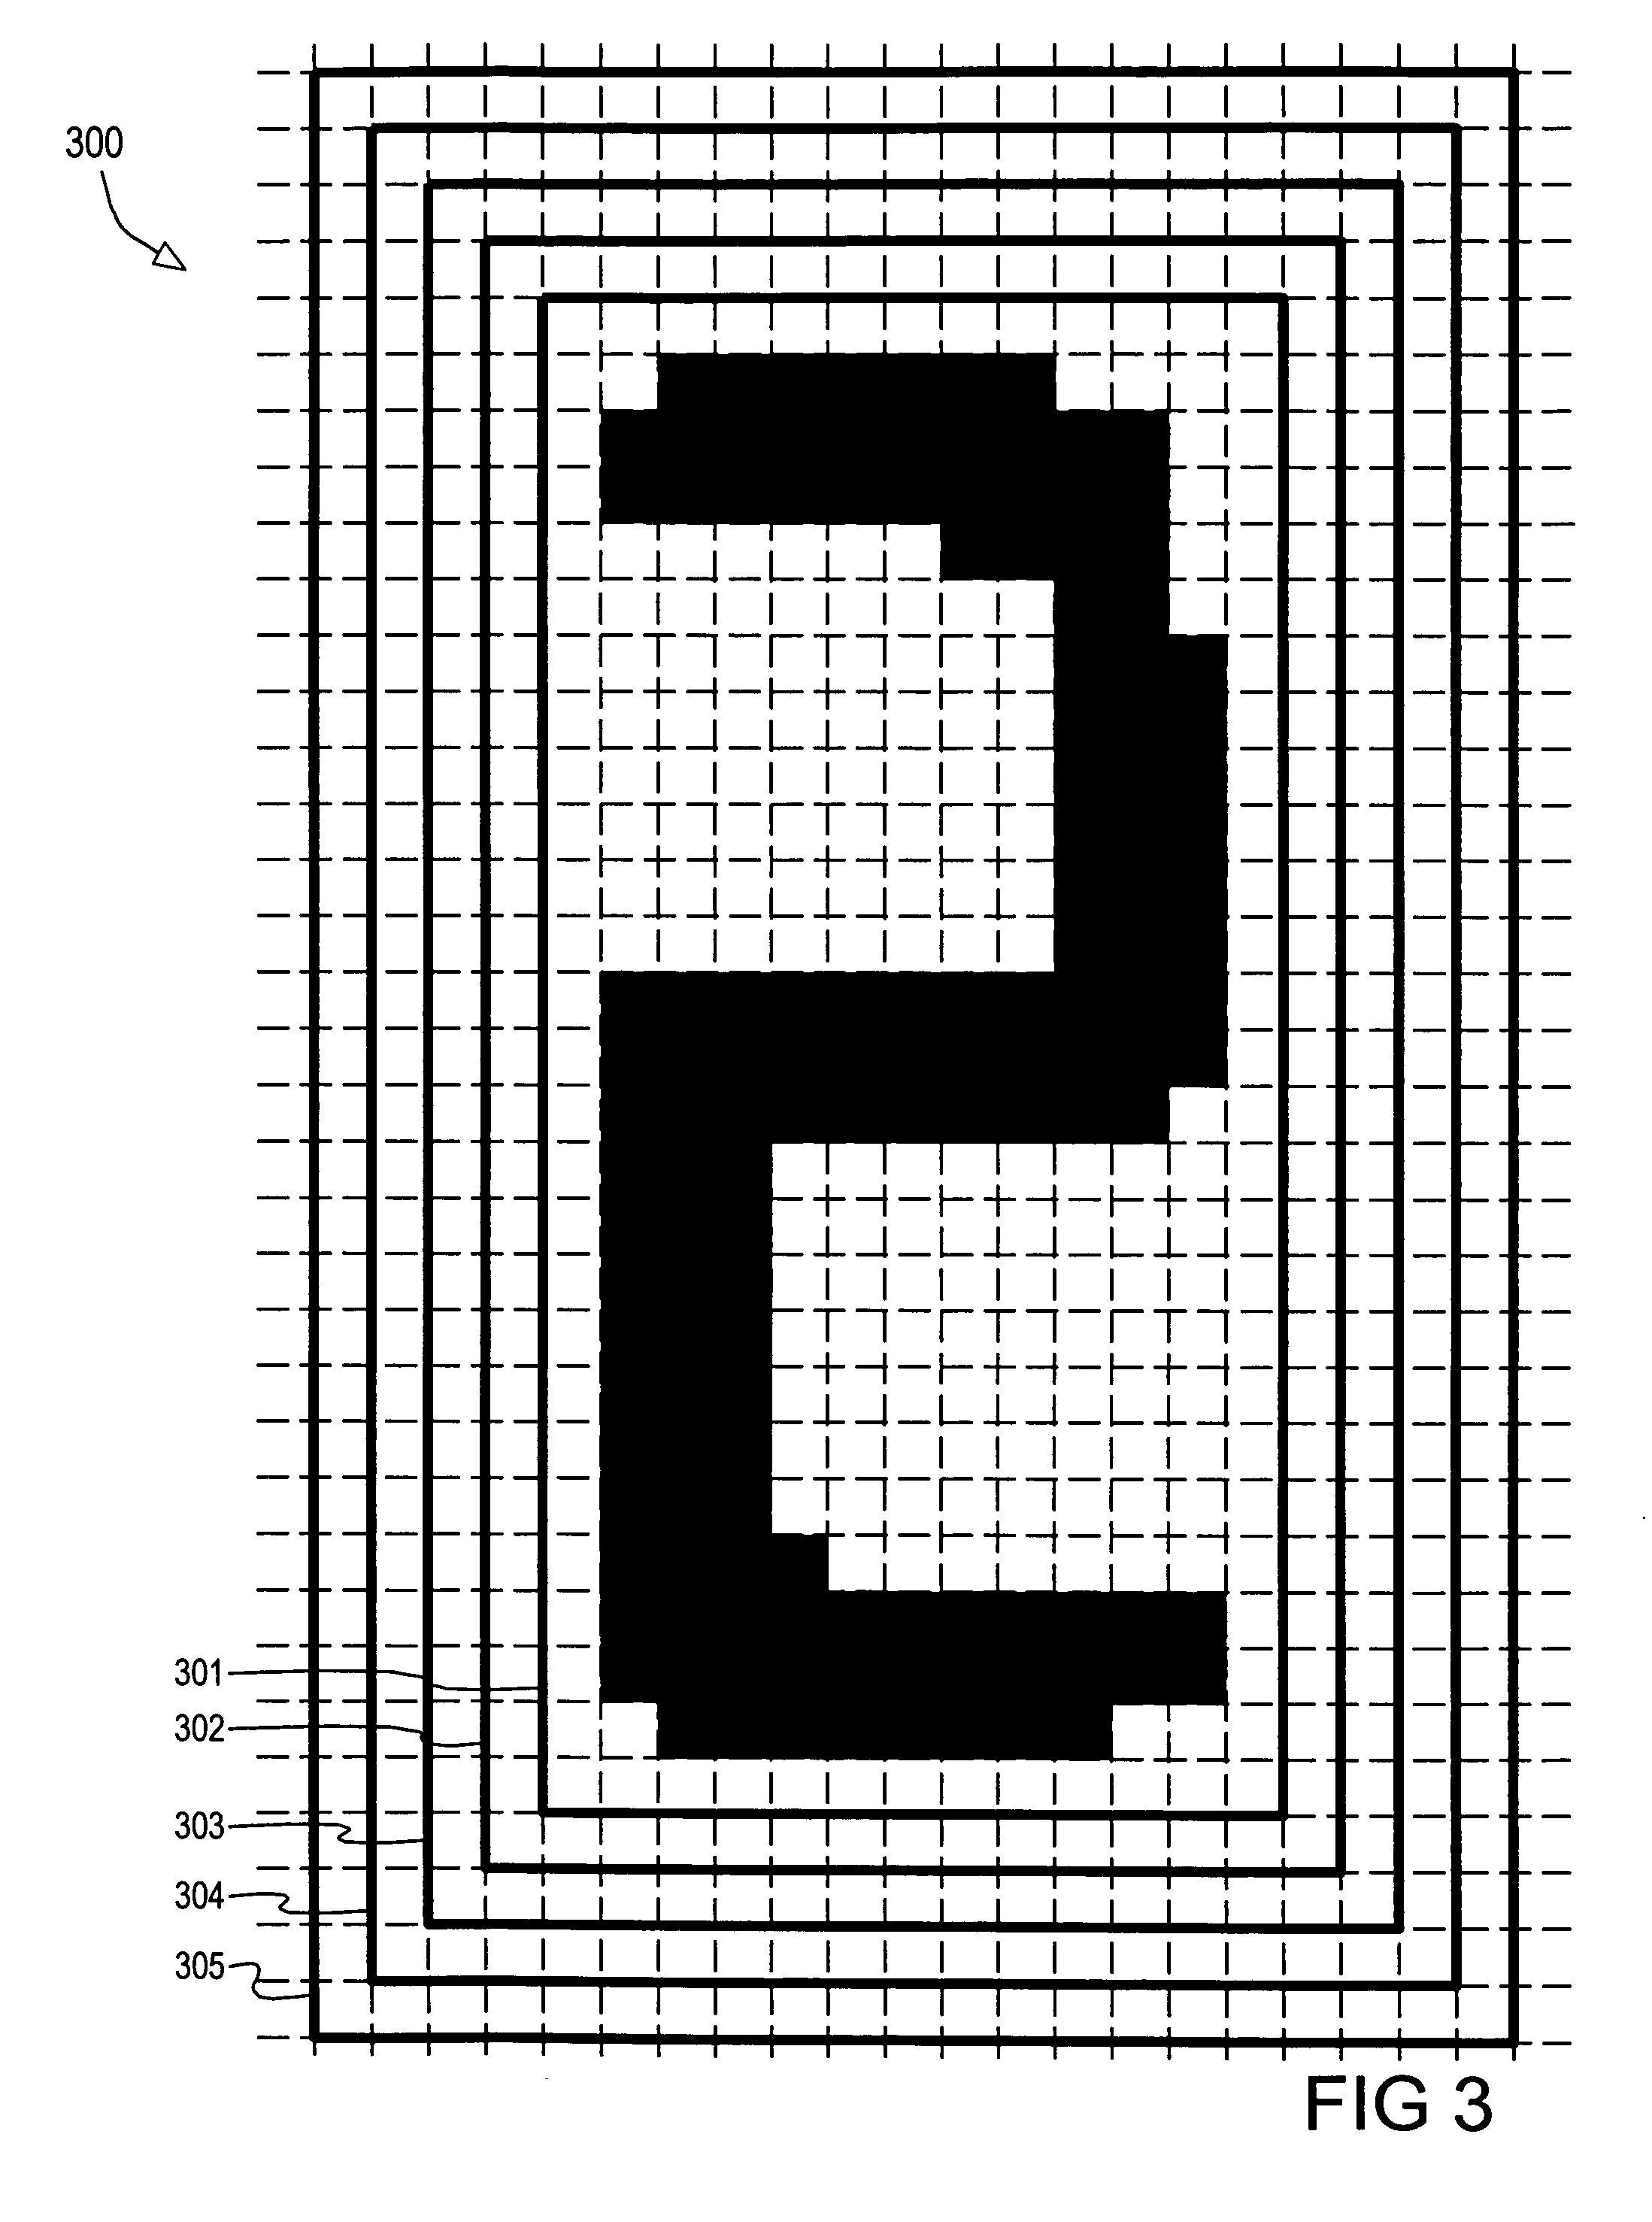 Black white image scaling for optical character recognition